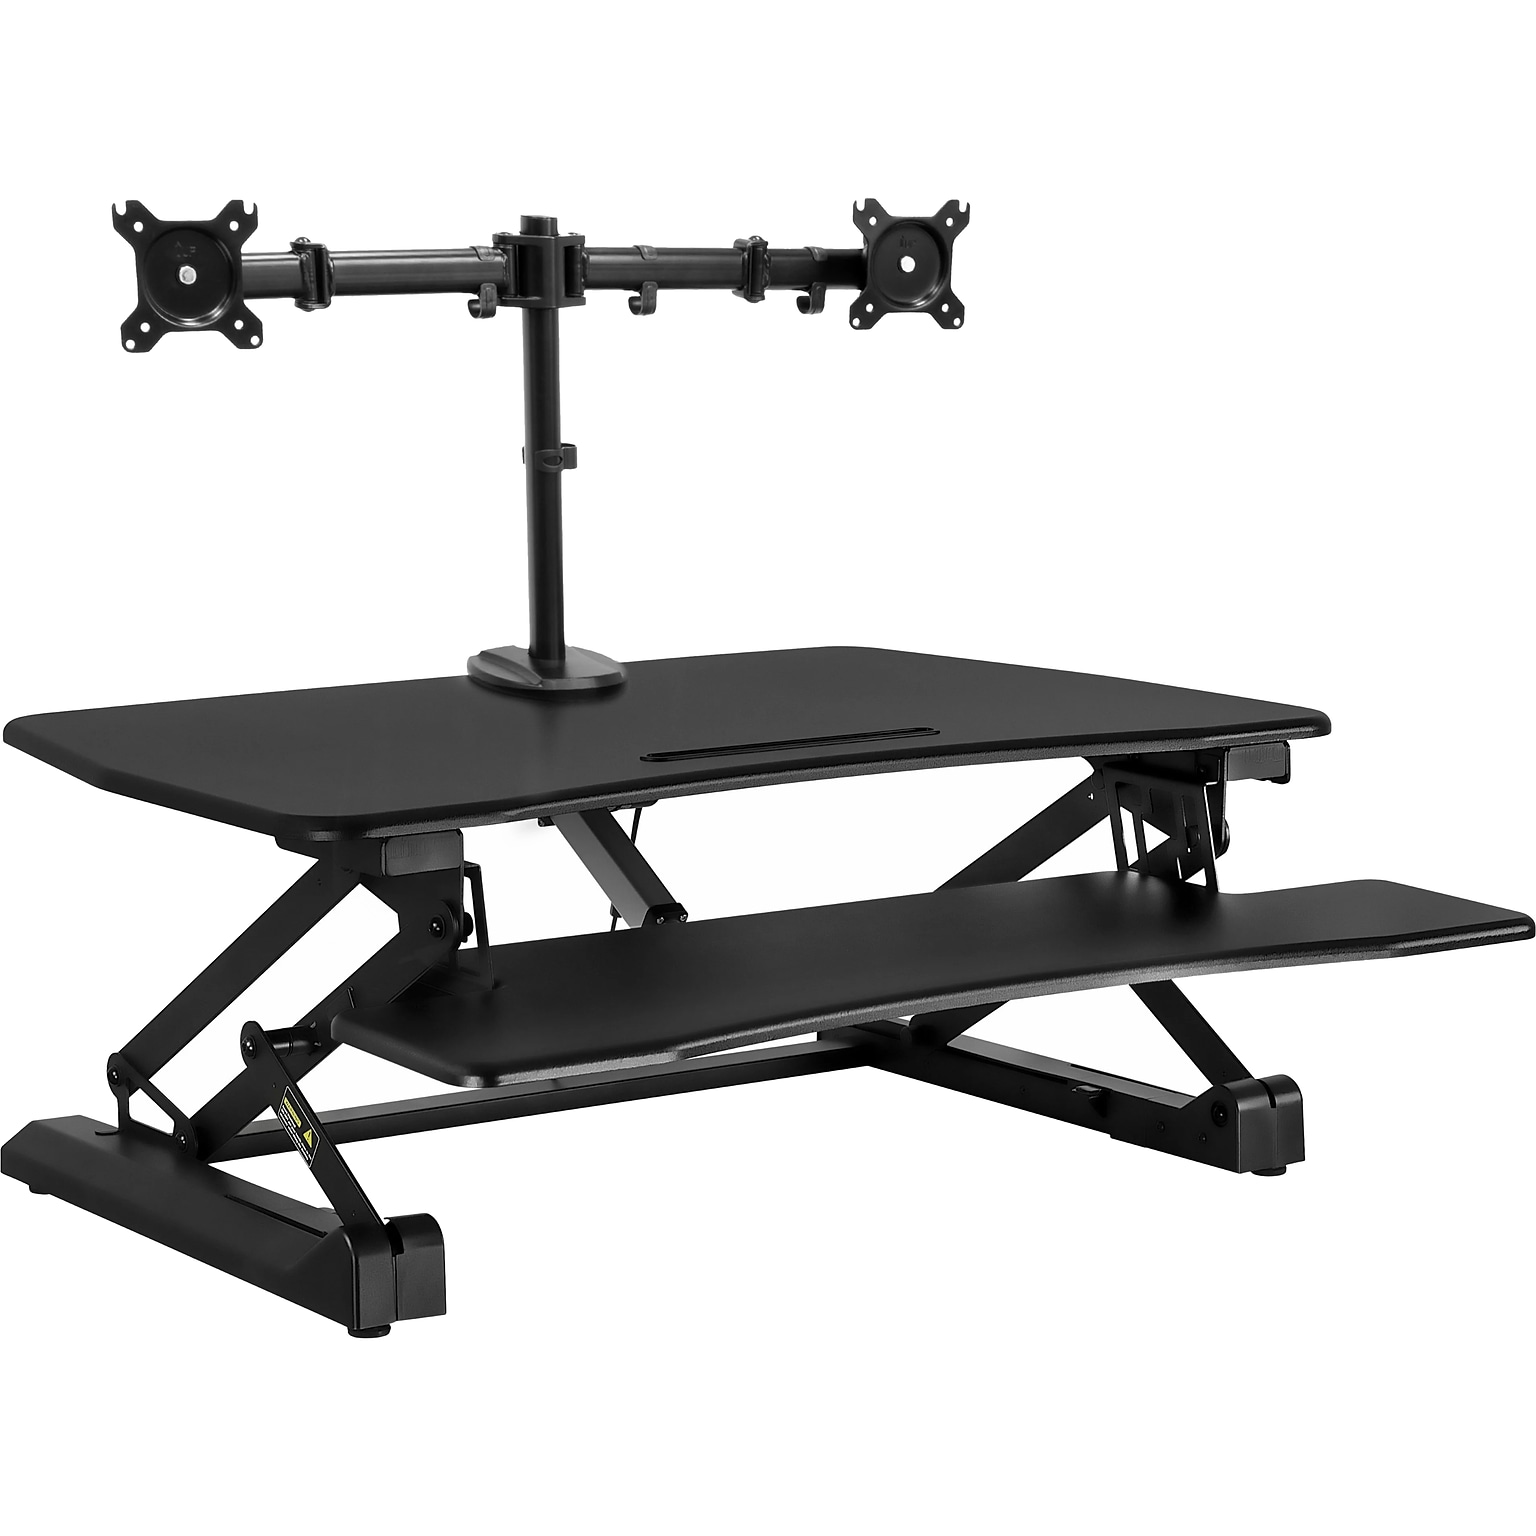 Mount-It! 35W Electric Adjustable Standing Desk Converter with Dual Monitor Mount and USB Charging Port, Black (MI-8053)